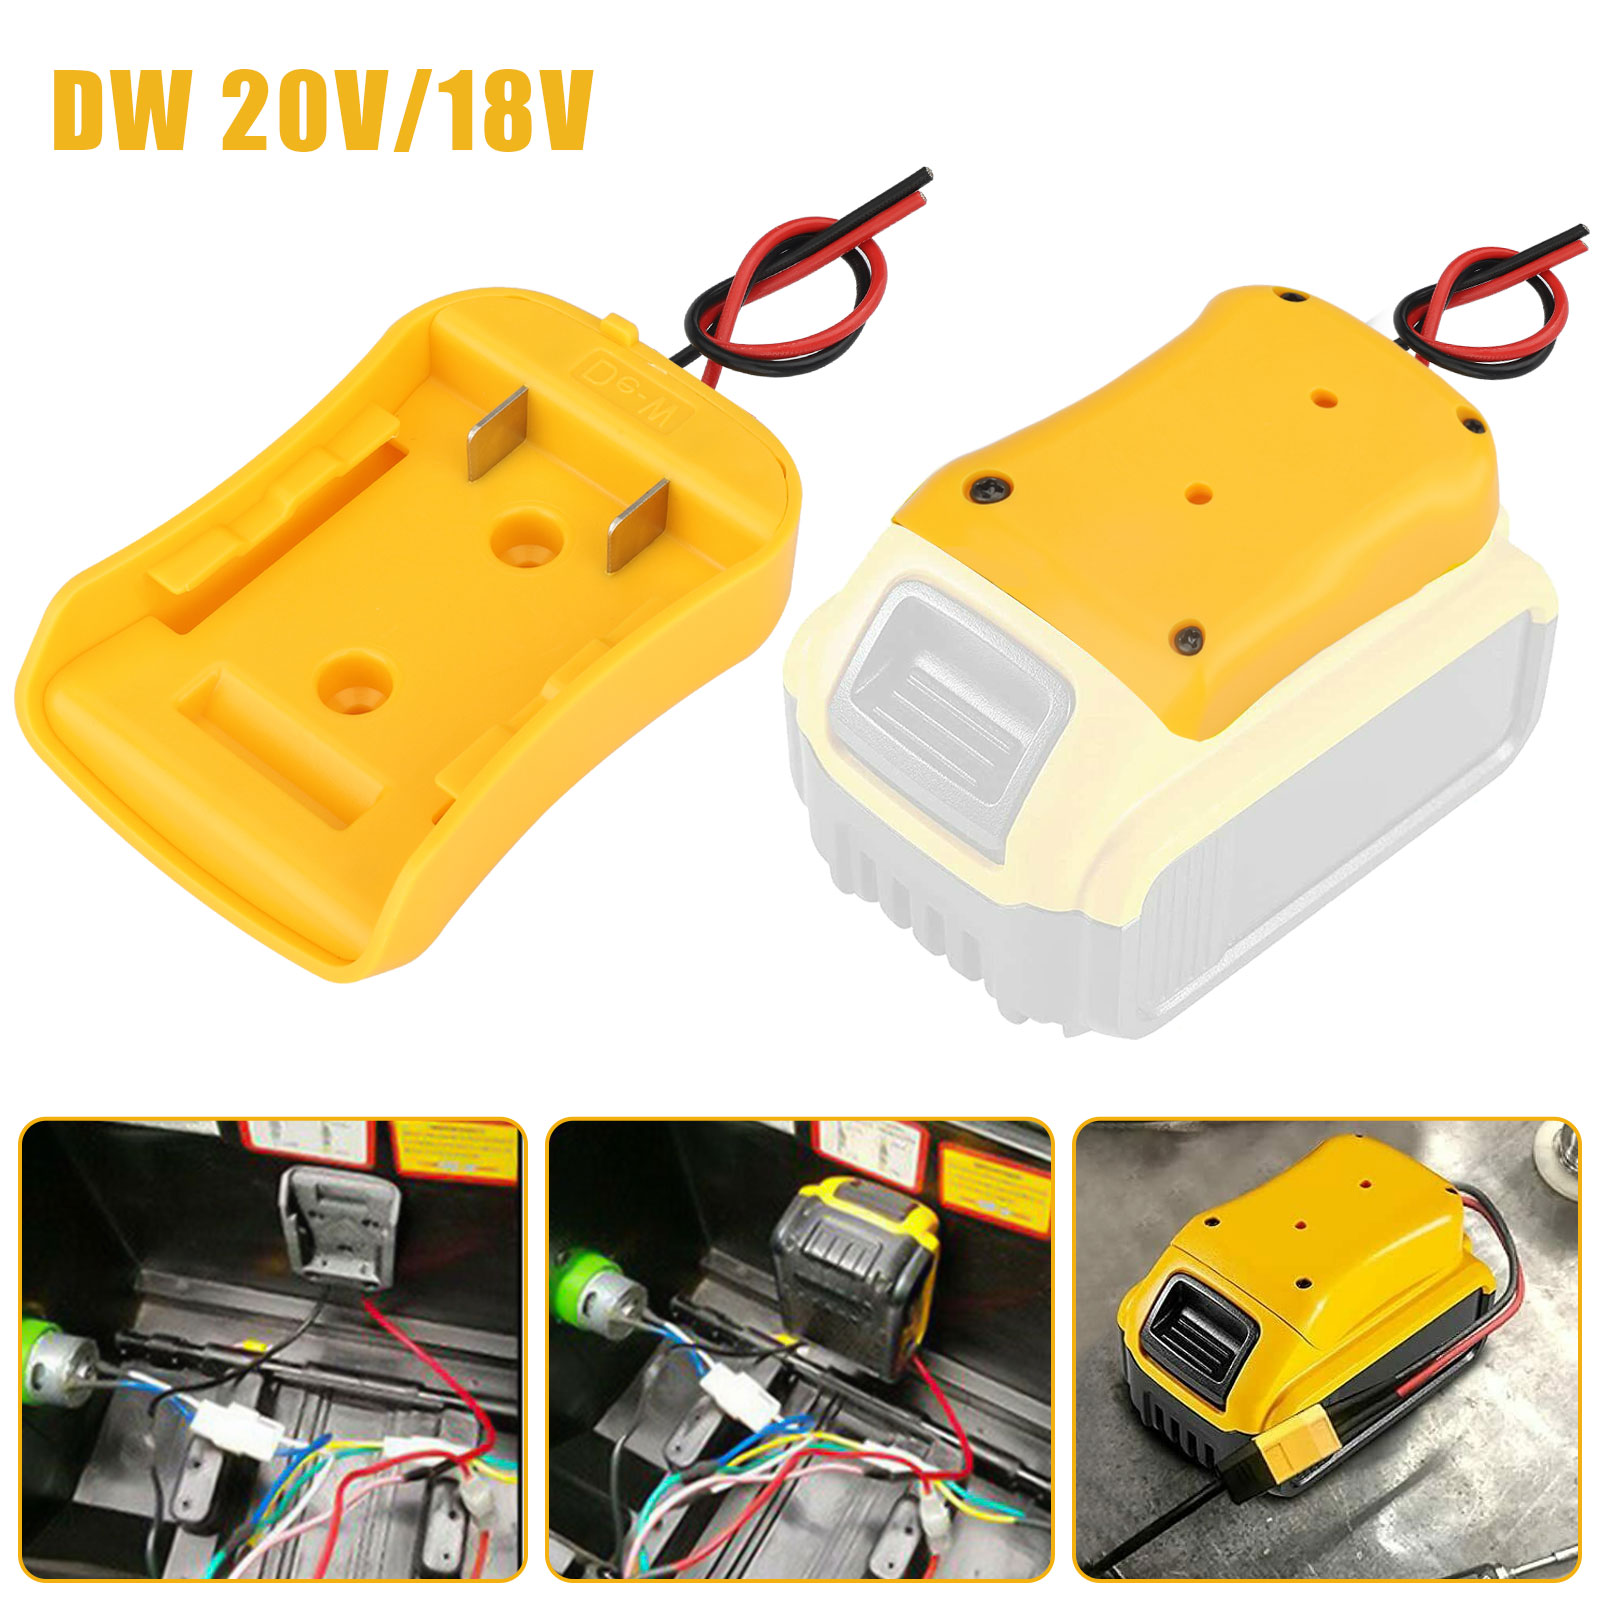 For Dewalt 18//20v Max Battery Extension Cord Adapter Battery Power Tool US Store